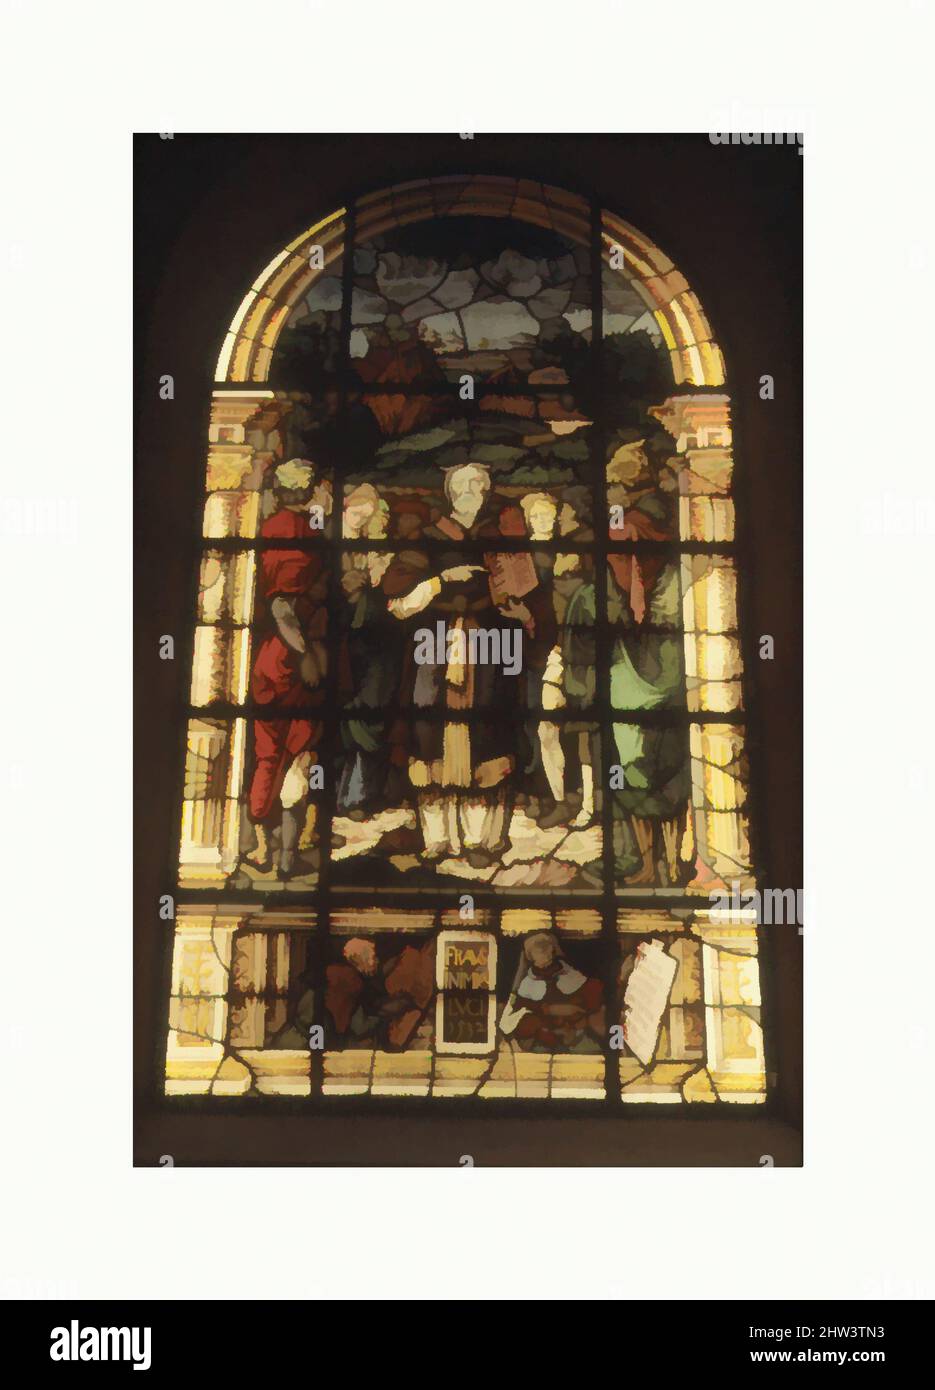 Art inspired by Moses presenting the tablets of law, 1532, French, Lorraine, Metz, Stained glass, H. 9' 11 3/8 x W. 66 1/4 in. (303.2 x 168.3 cm.) a-o only, Glass-Stained, Valentin Bousch (French, active 1514–41, died 1541), This window comes from a series of seven windows made for the, Classic works modernized by Artotop with a splash of modernity. Shapes, color and value, eye-catching visual impact on art. Emotions through freedom of artworks in a contemporary way. A timeless message pursuing a wildly creative new direction. Artists turning to the digital medium and creating the Artotop NFT Stock Photo